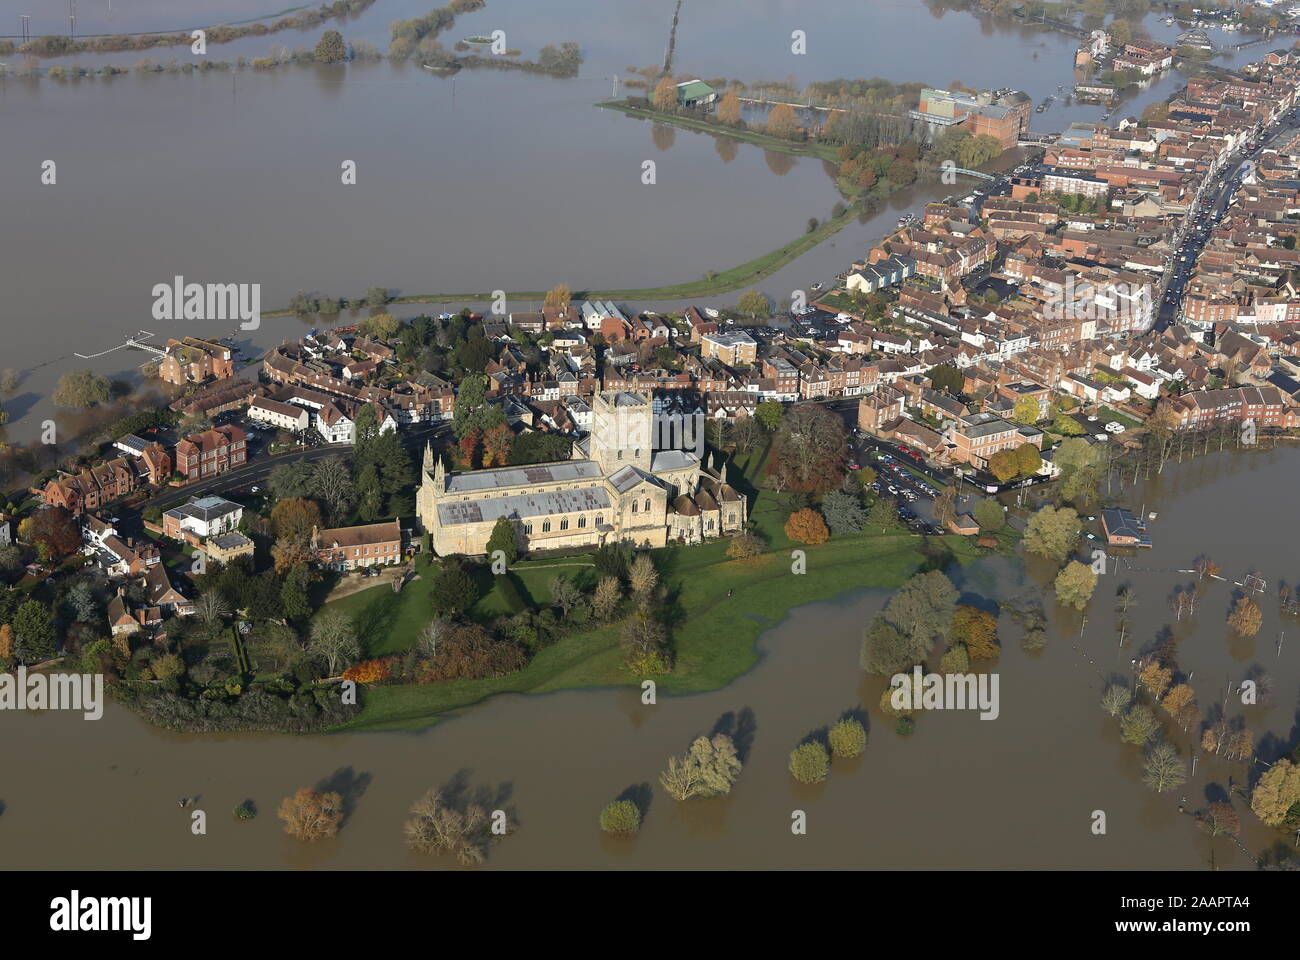 During November 2019, the River Severn has been the subject of dramatic flooding with levels not seen since July 2007. Tewkesbury flooded as always. Stock Photo